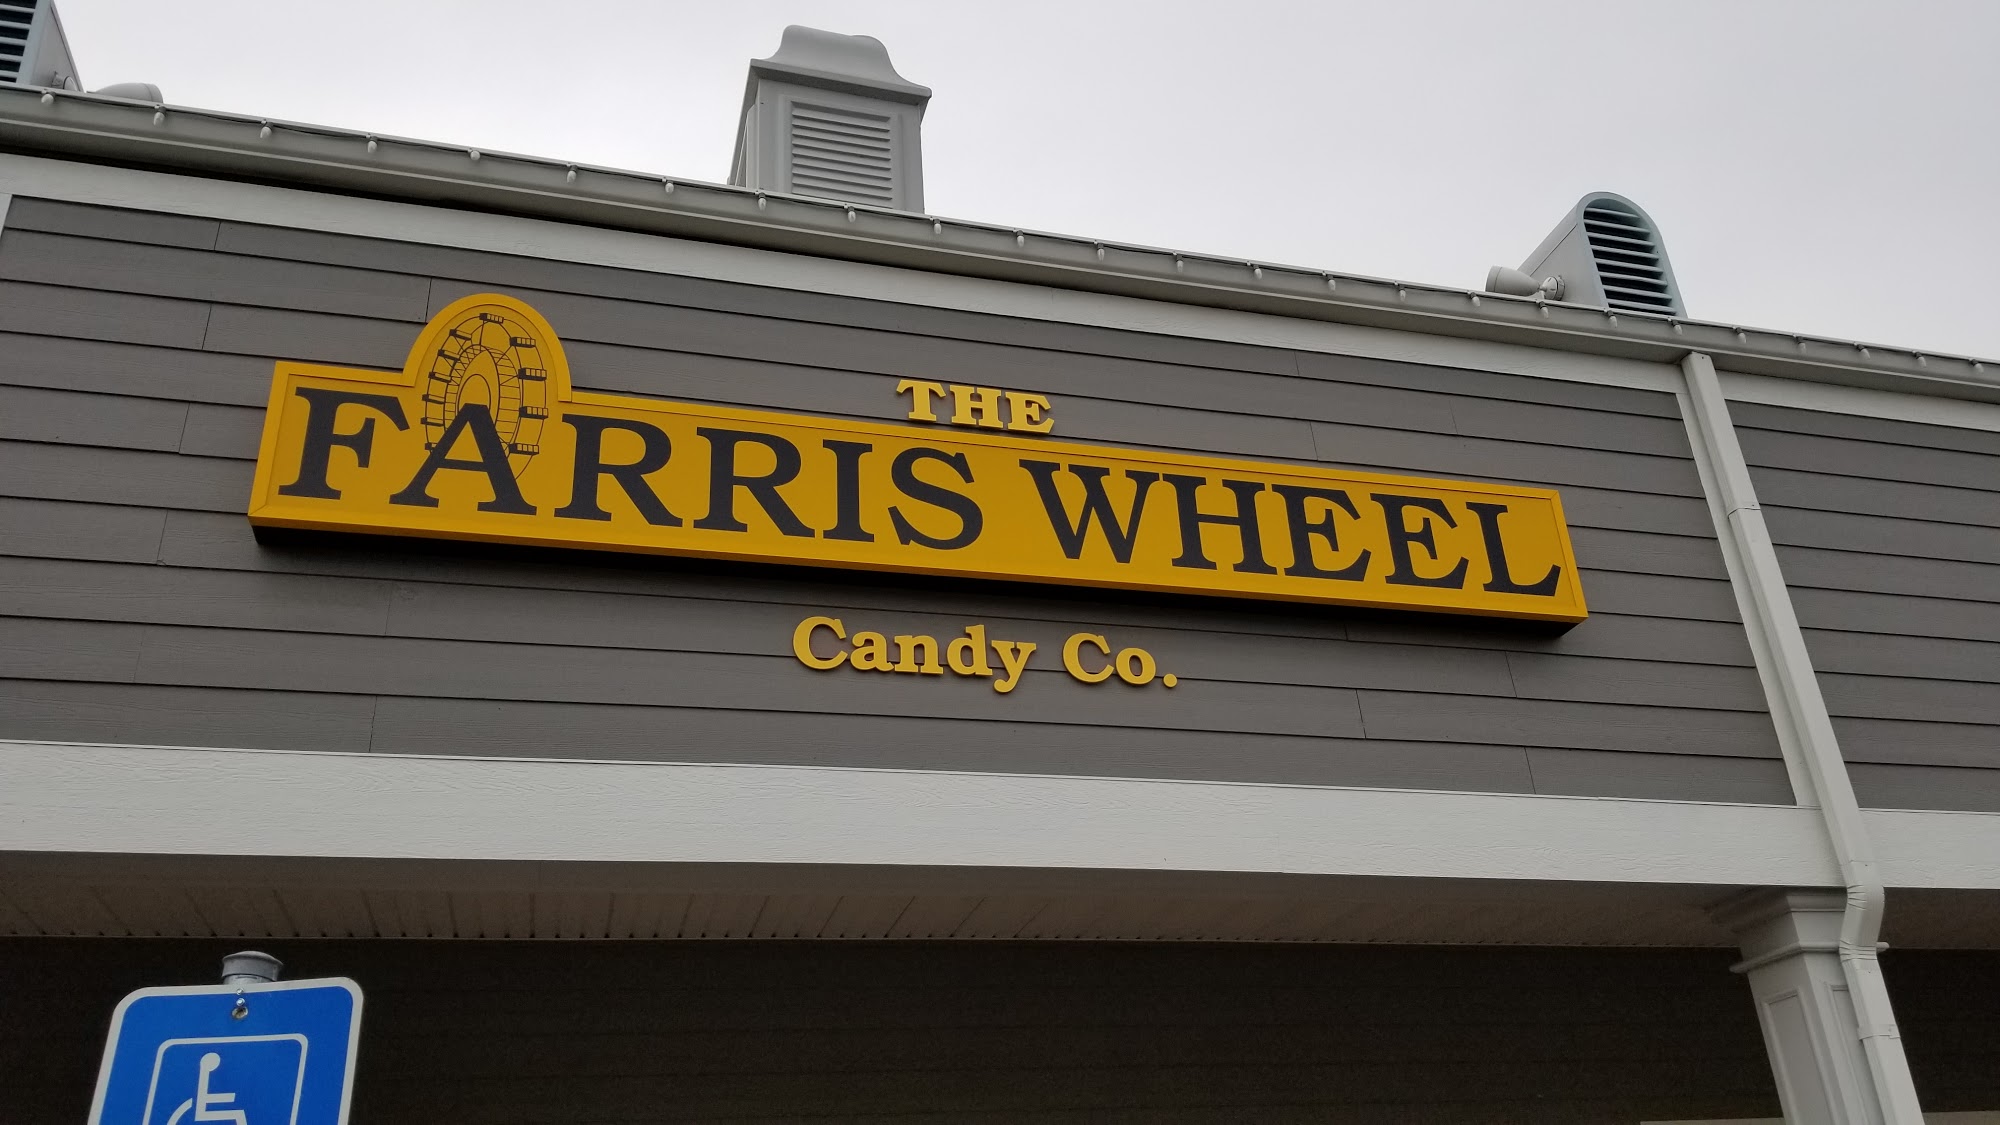 The Farris Wheel Candy Co.